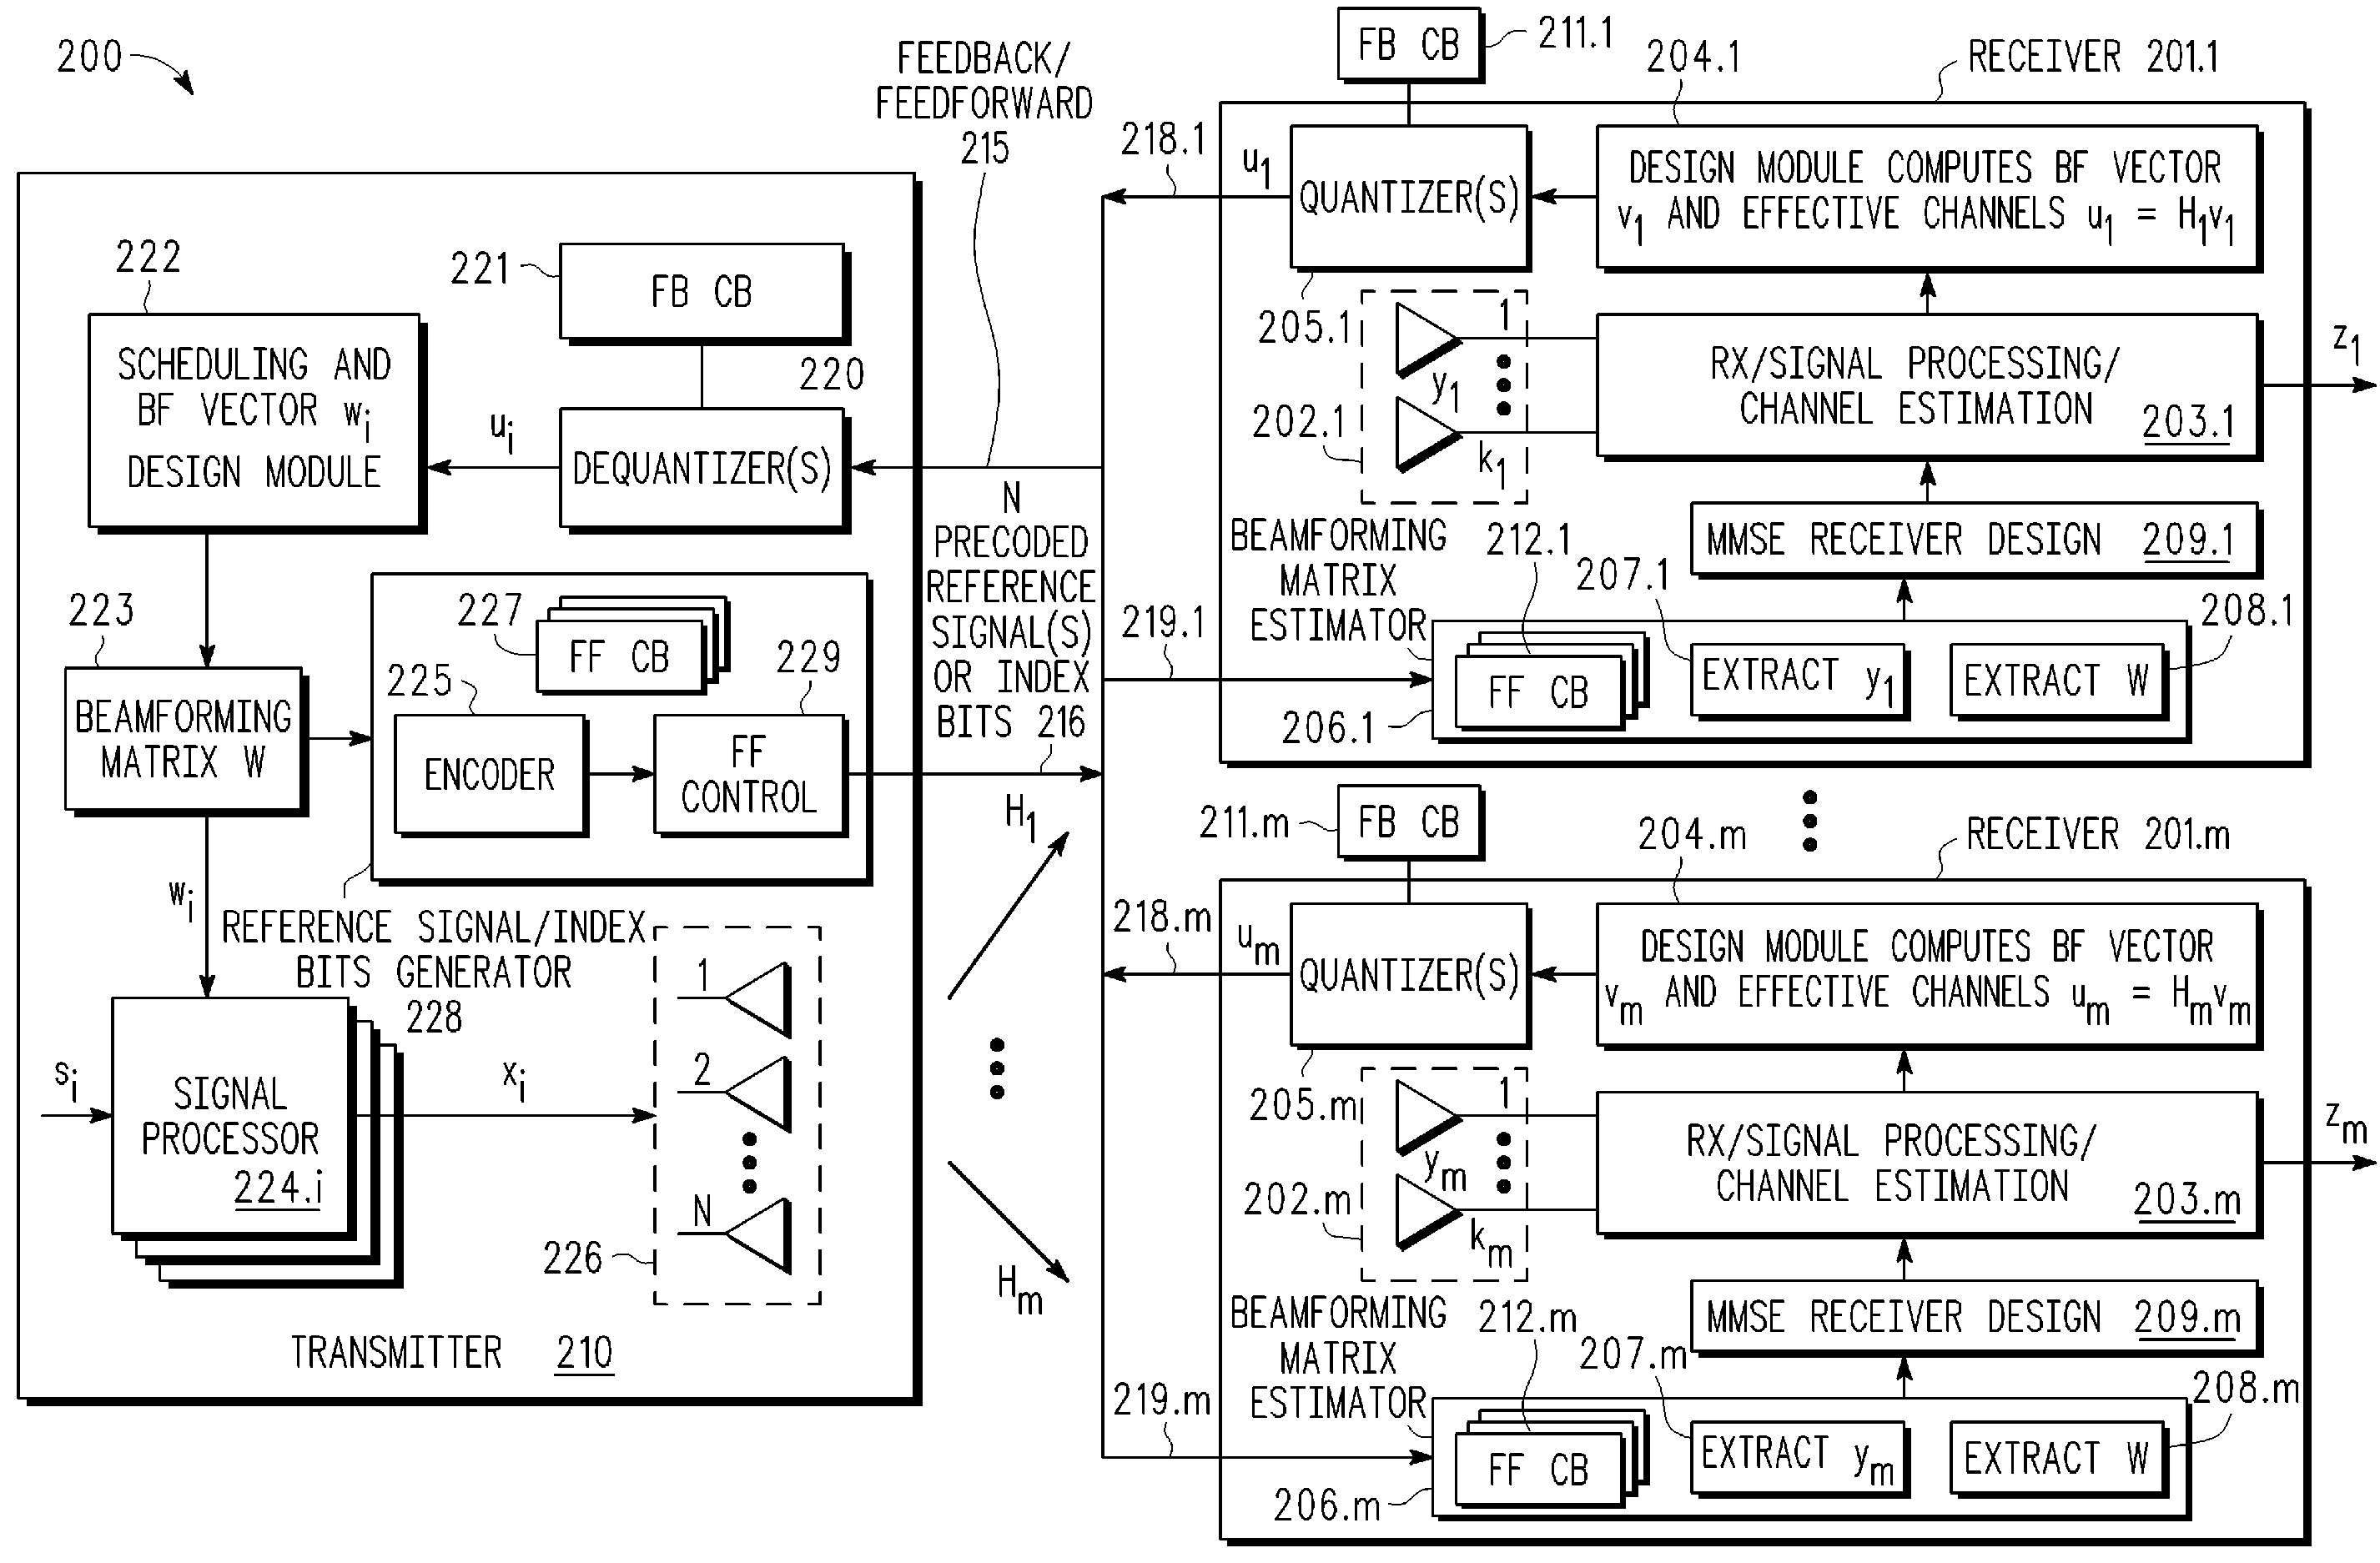 Generalized reference signaling scheme for multi-user, multiple input, multiple output (MU-MIMO) using arbitrarily precoded reference signals